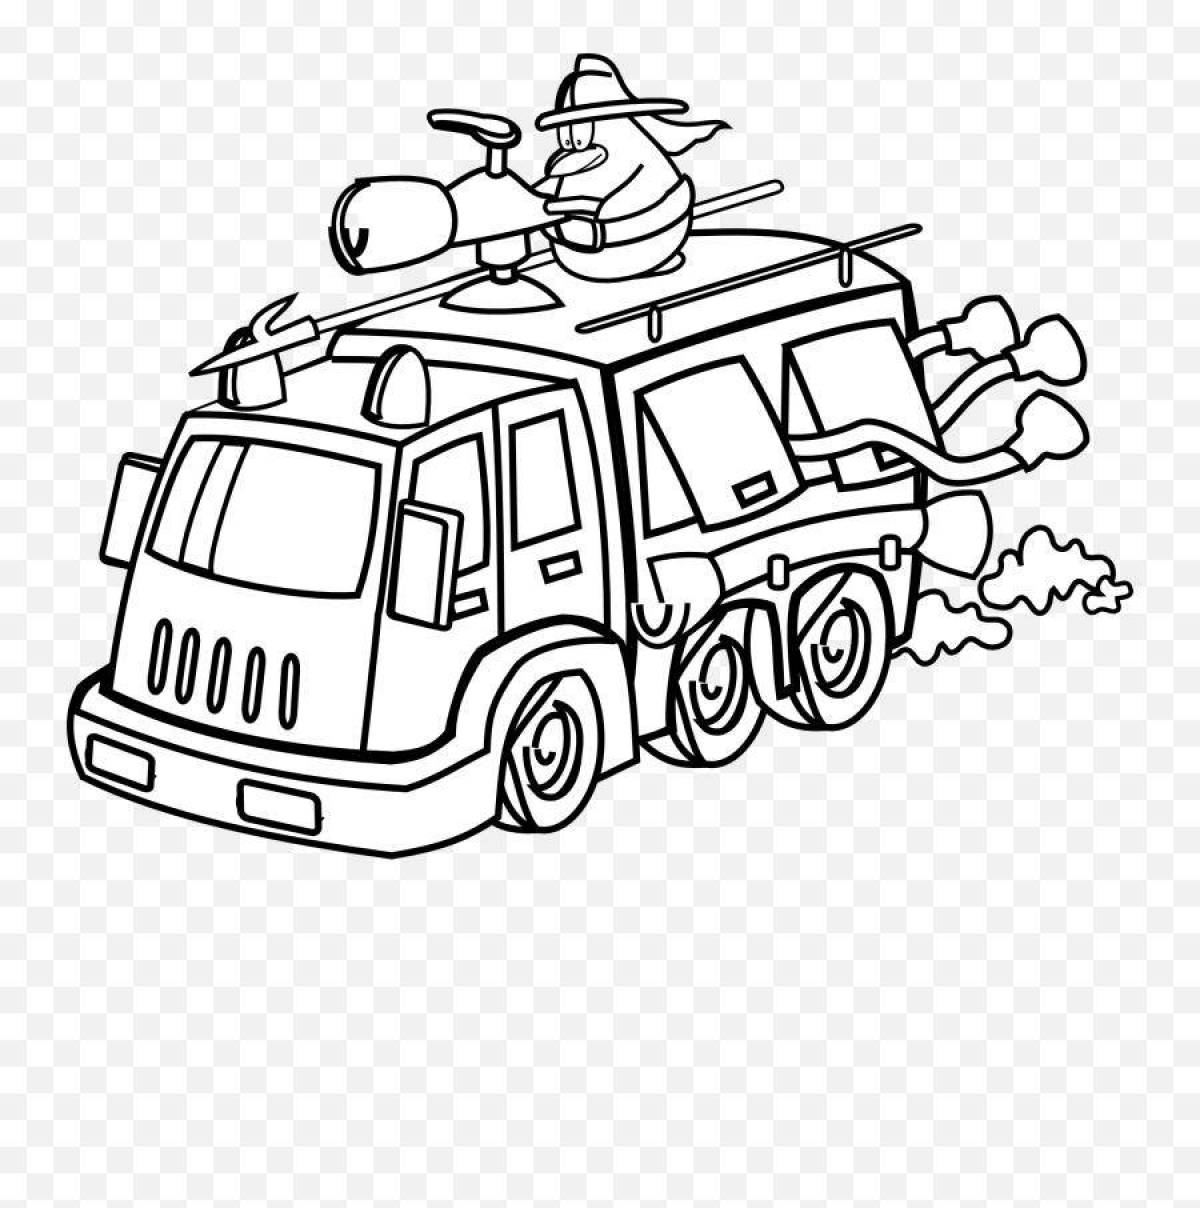 Coloring book jolly ray and fire patrol